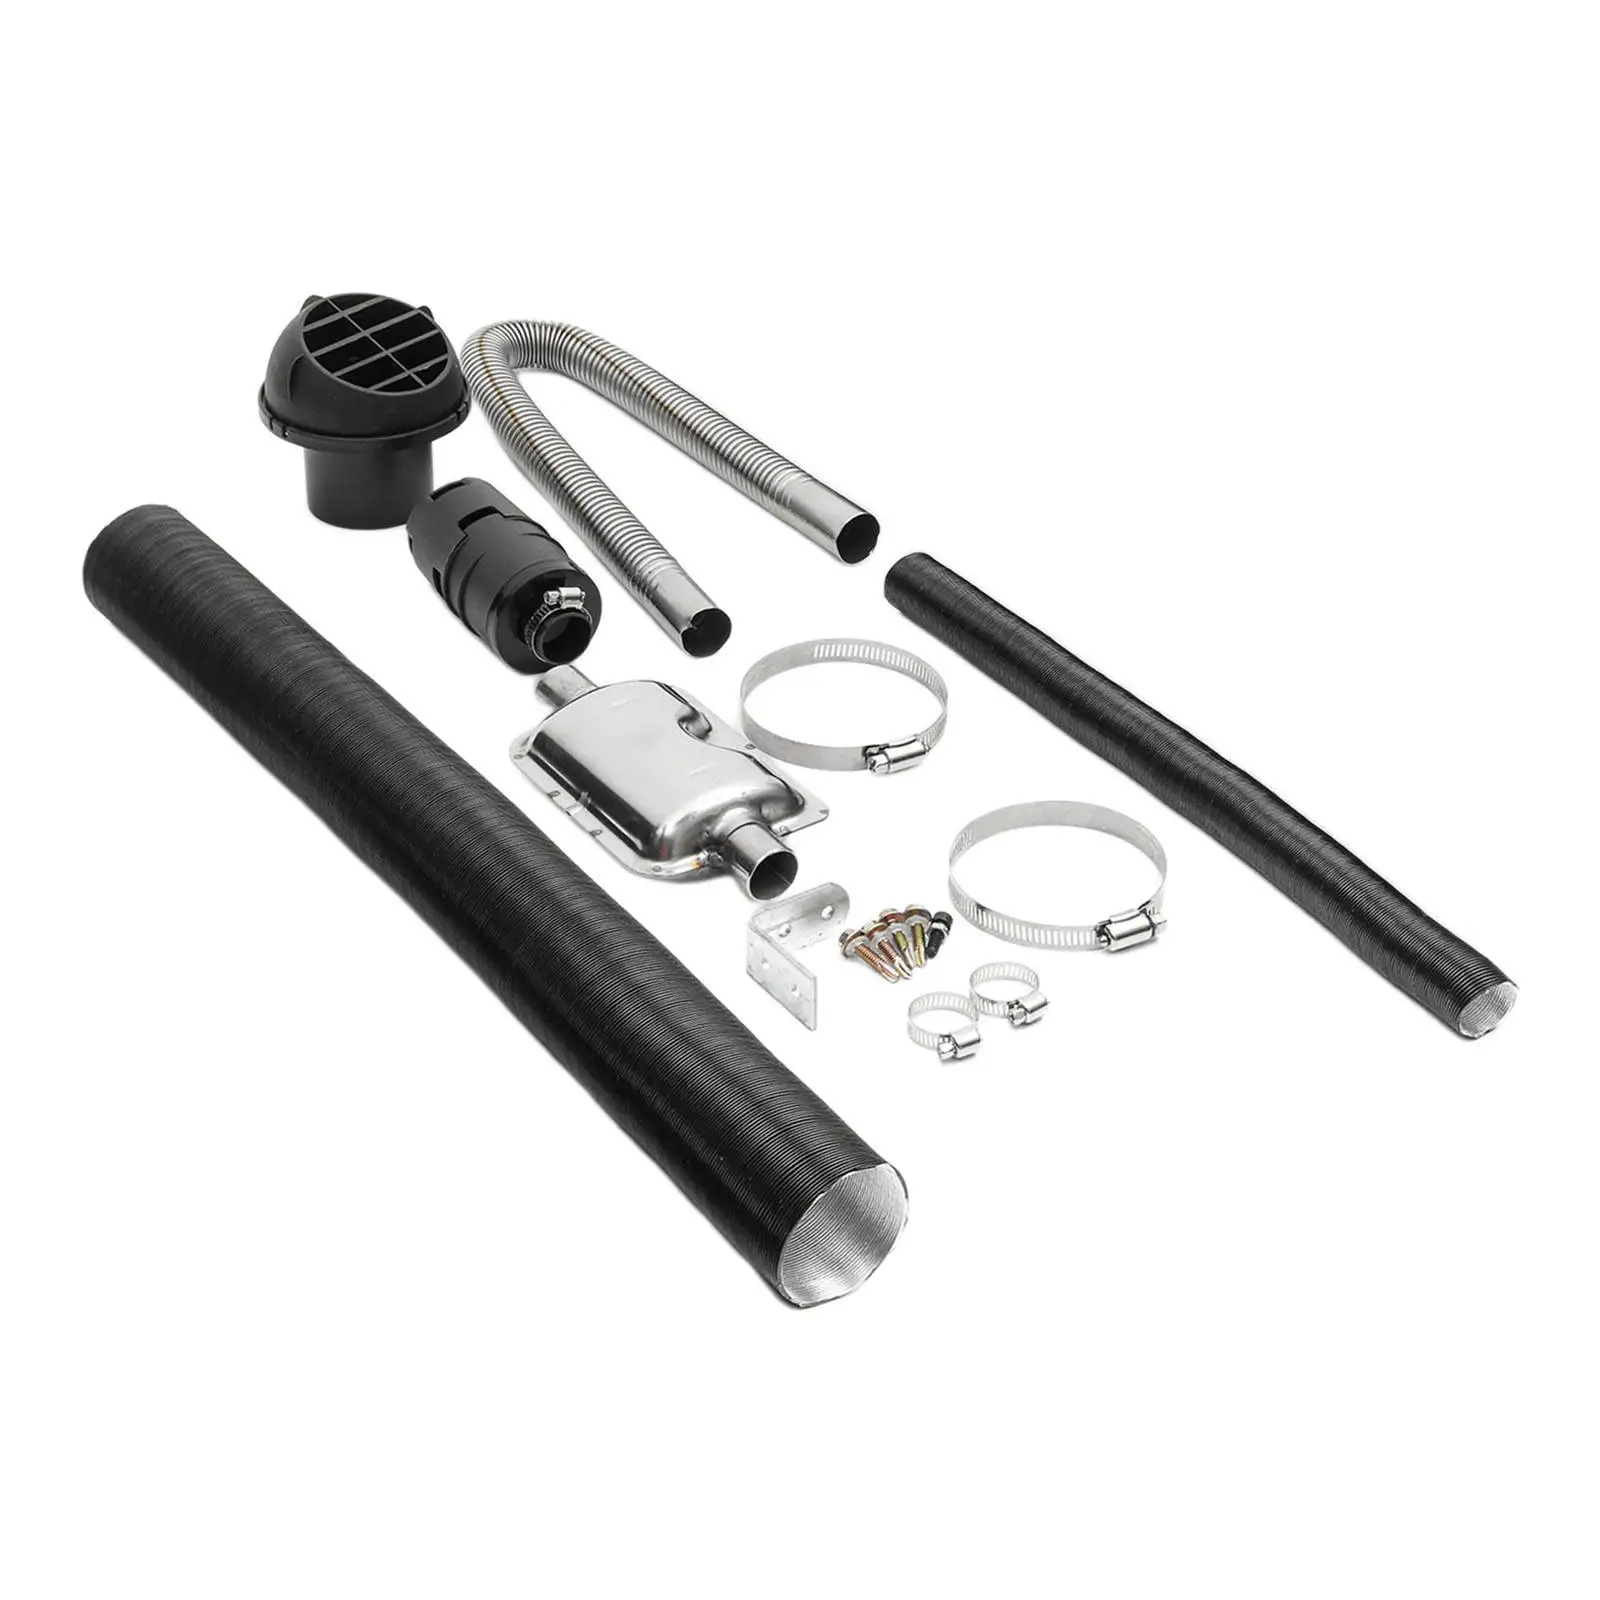 Air Car Heater Replacements Kit 24mm Exhaust Muffler Silencer +25mm Filter+ Heater Duct Exhaust Air Intake Pipe